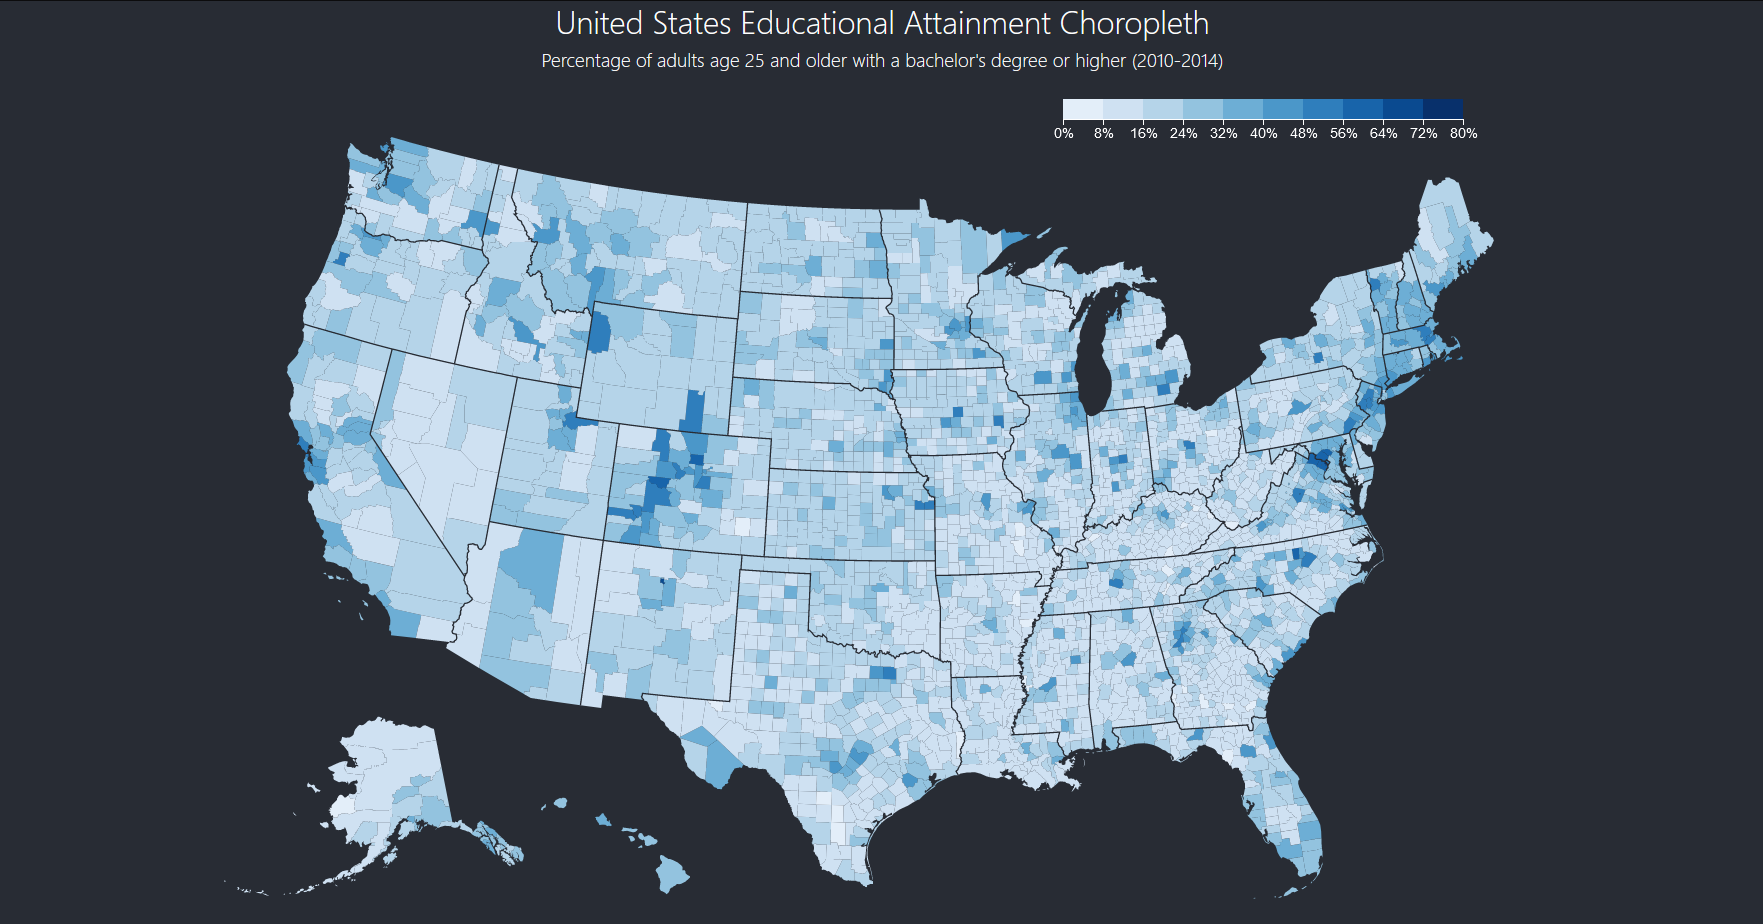 Data Visualisation Project 4 - US Educational Attainment Choropleth (2010-2014)